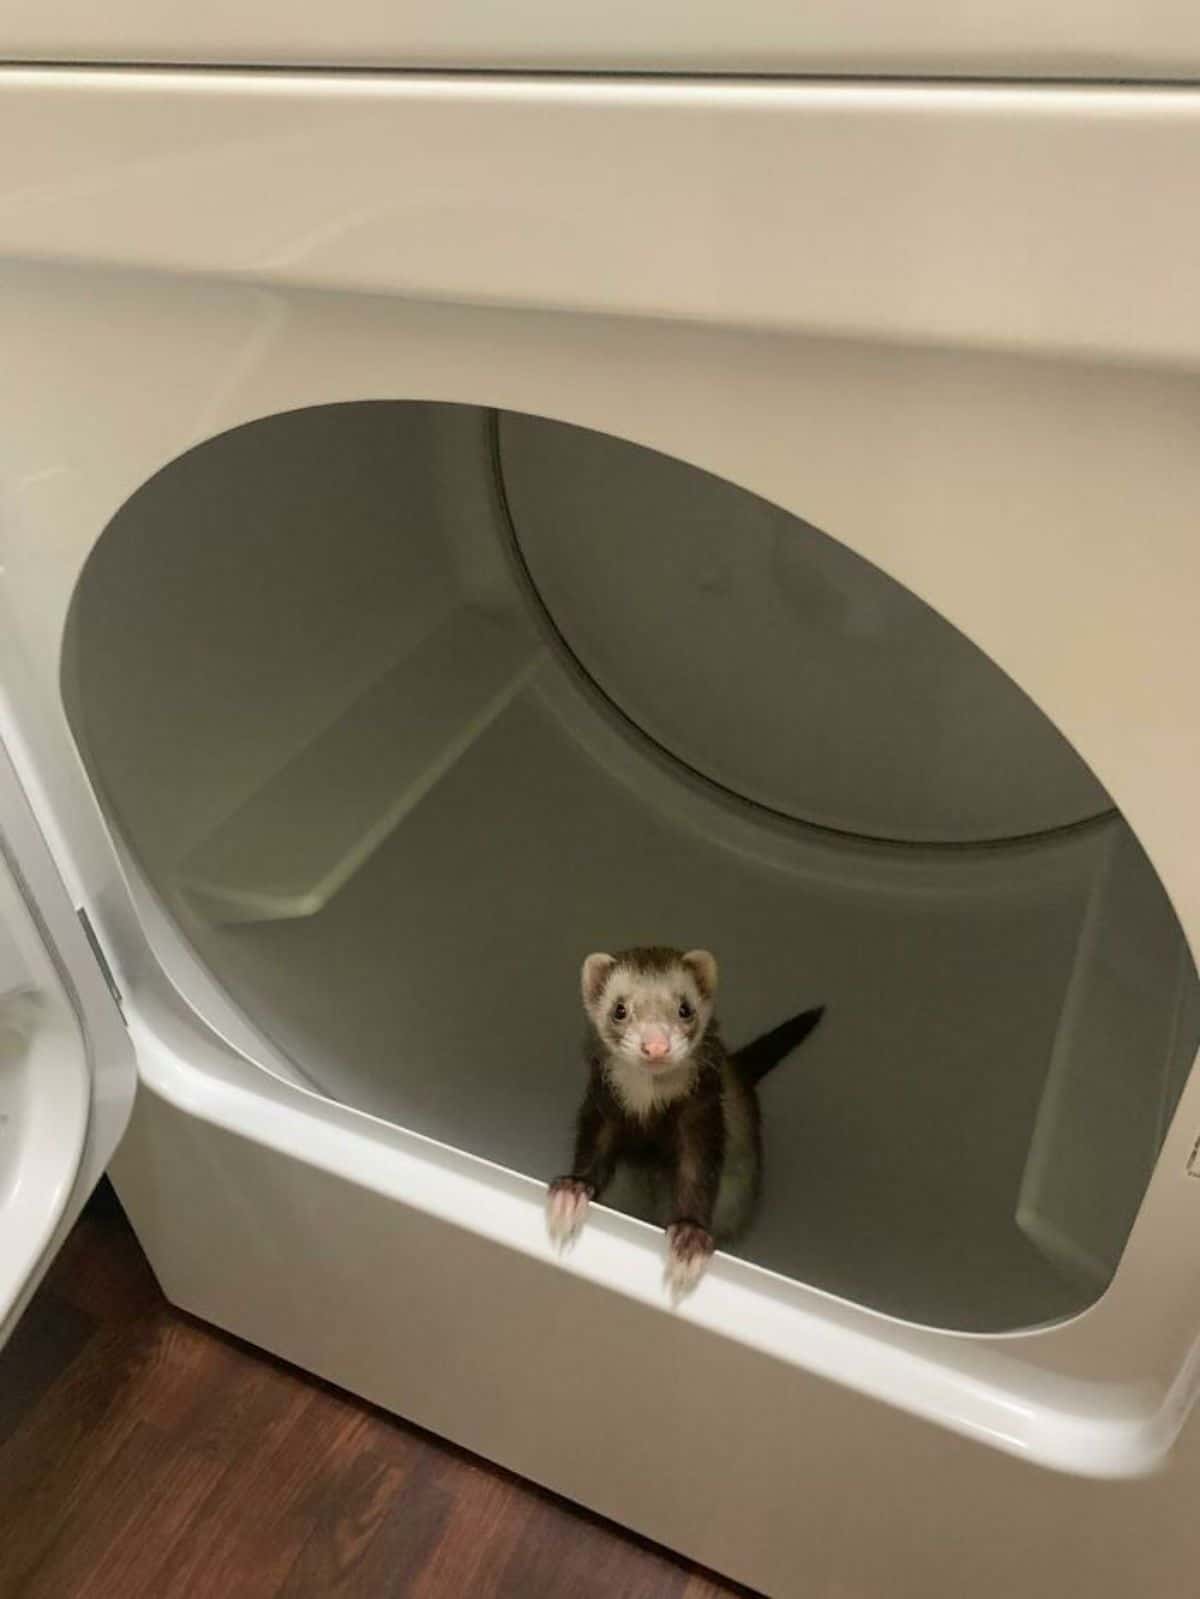 brown and white ferret looking up from inside the drum of a washing machine looking really sad